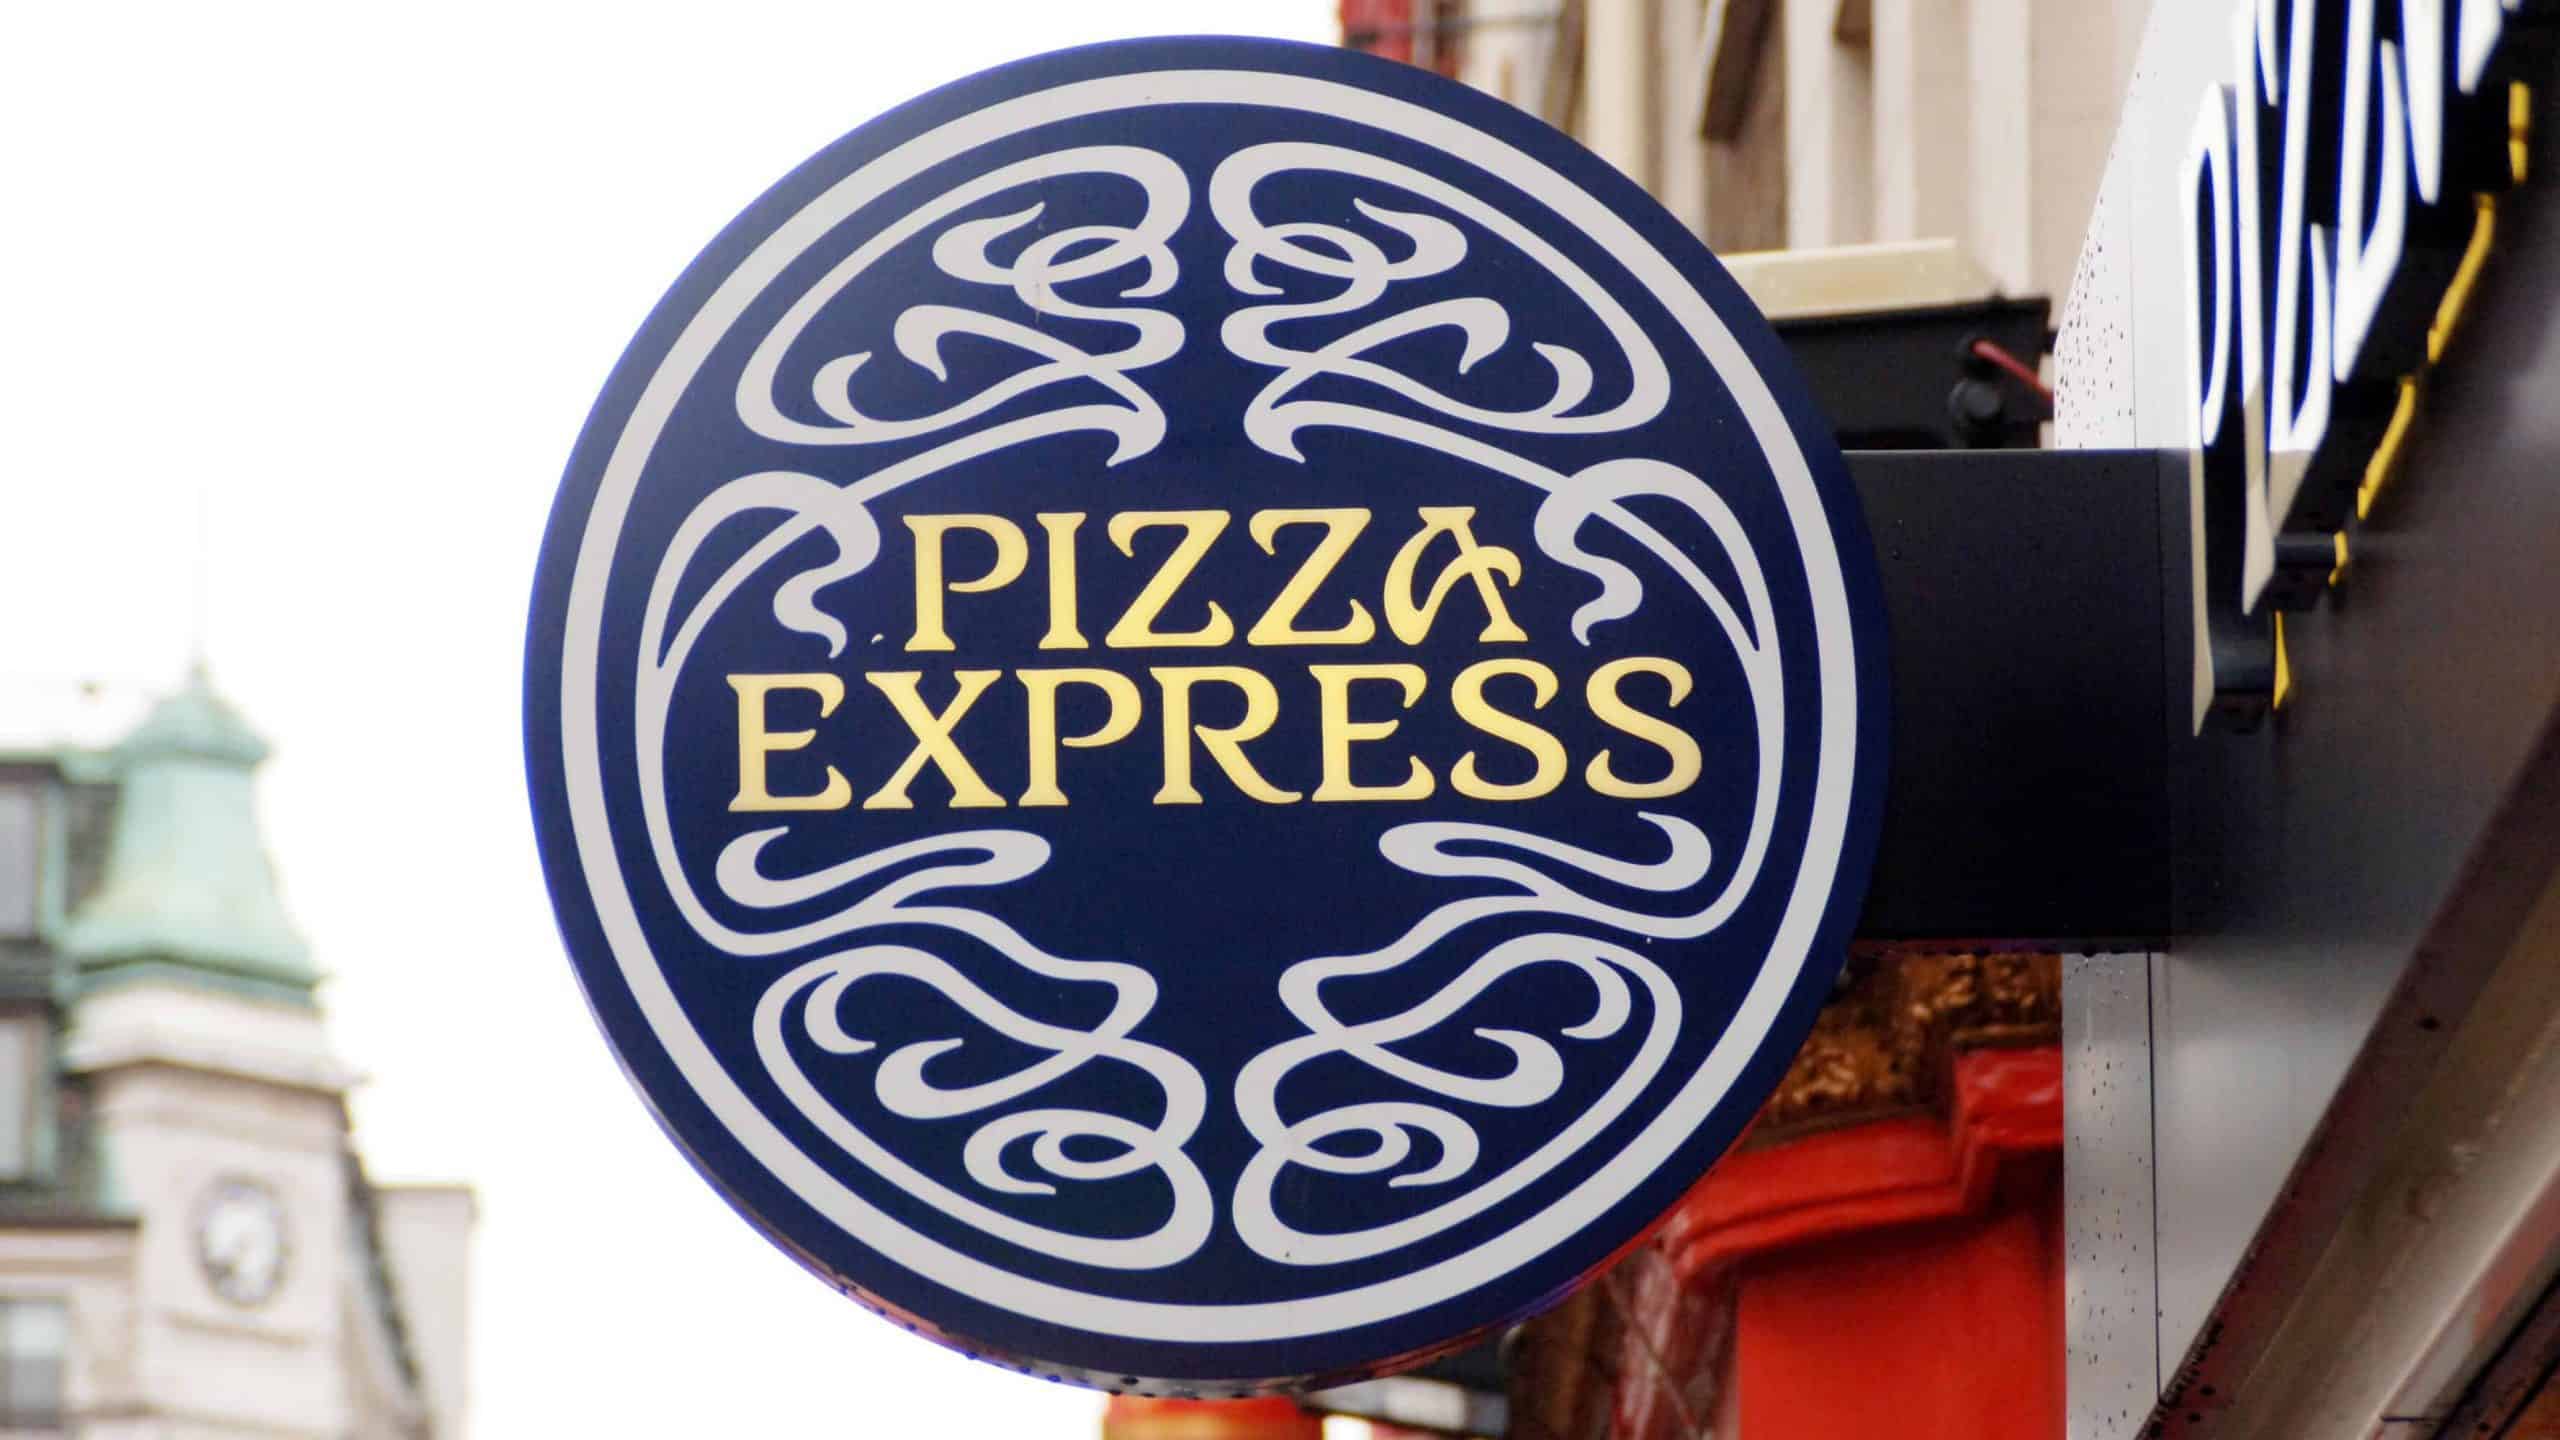 Pizza Express calls in financial advisers as debts spiral to £655m